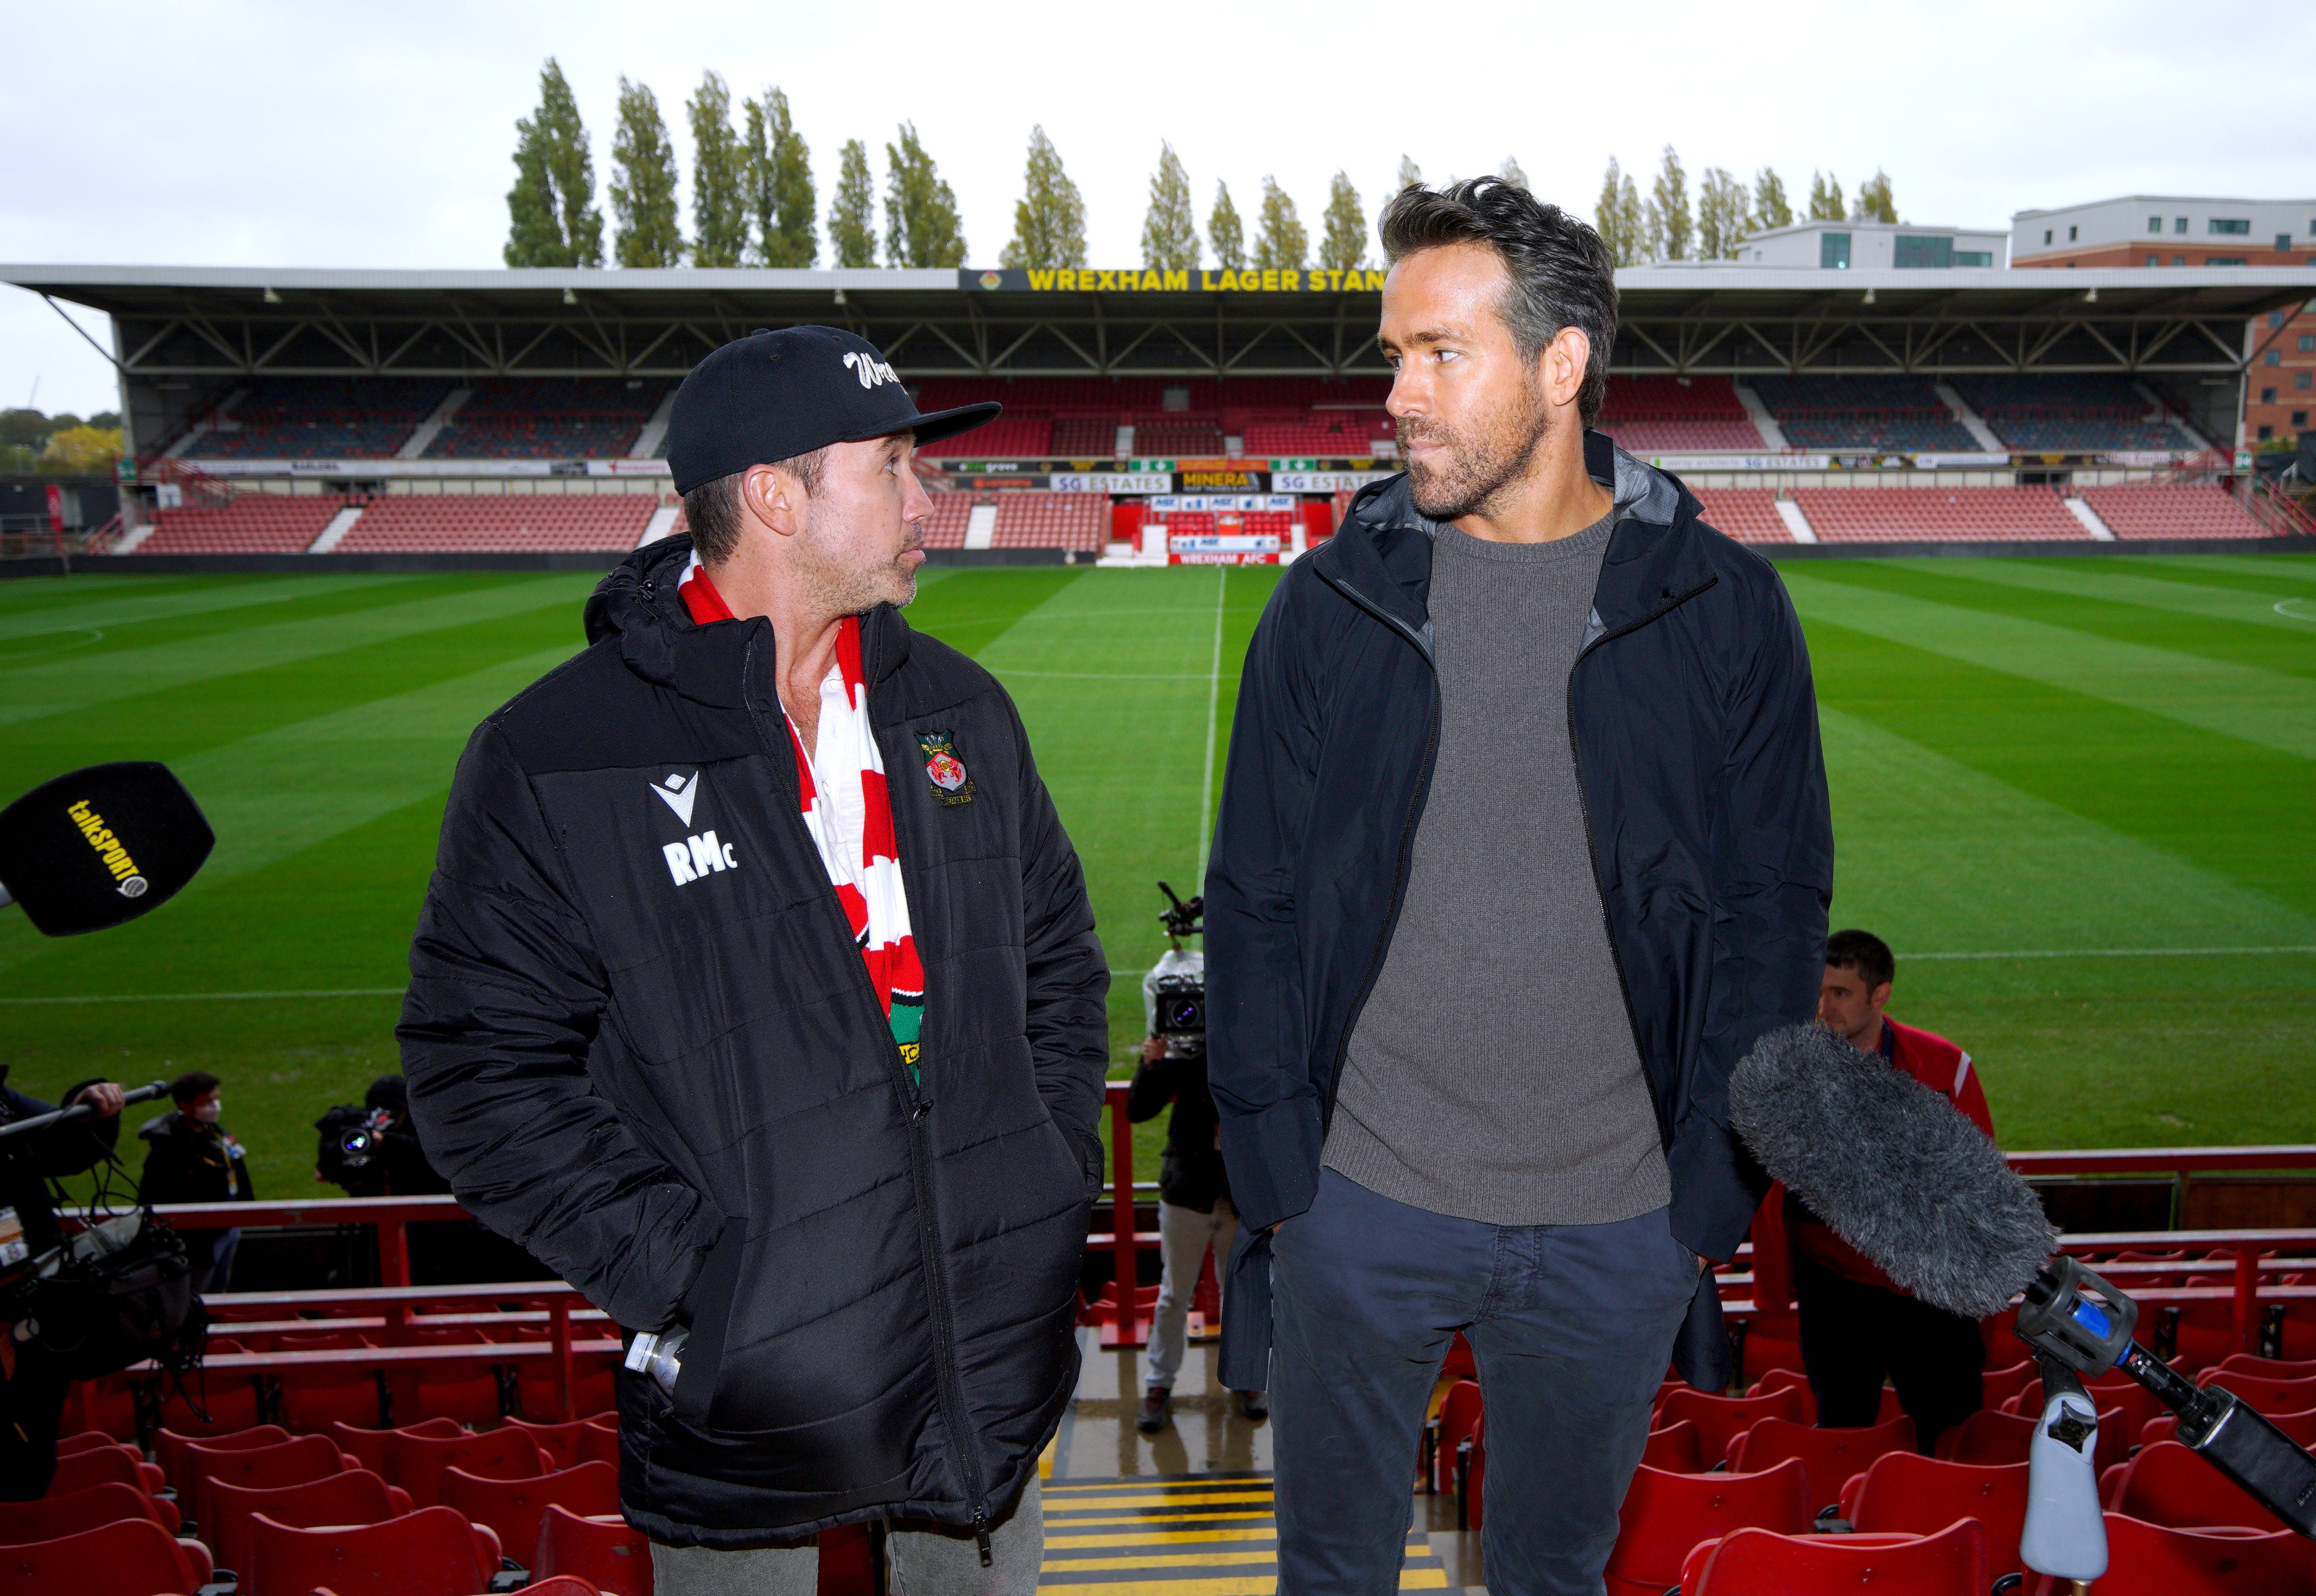 Wrexham owners Rob McElhenney and Ryan Reynolds during a press conference at the Racecourse Ground (Peter Byrne/PA)